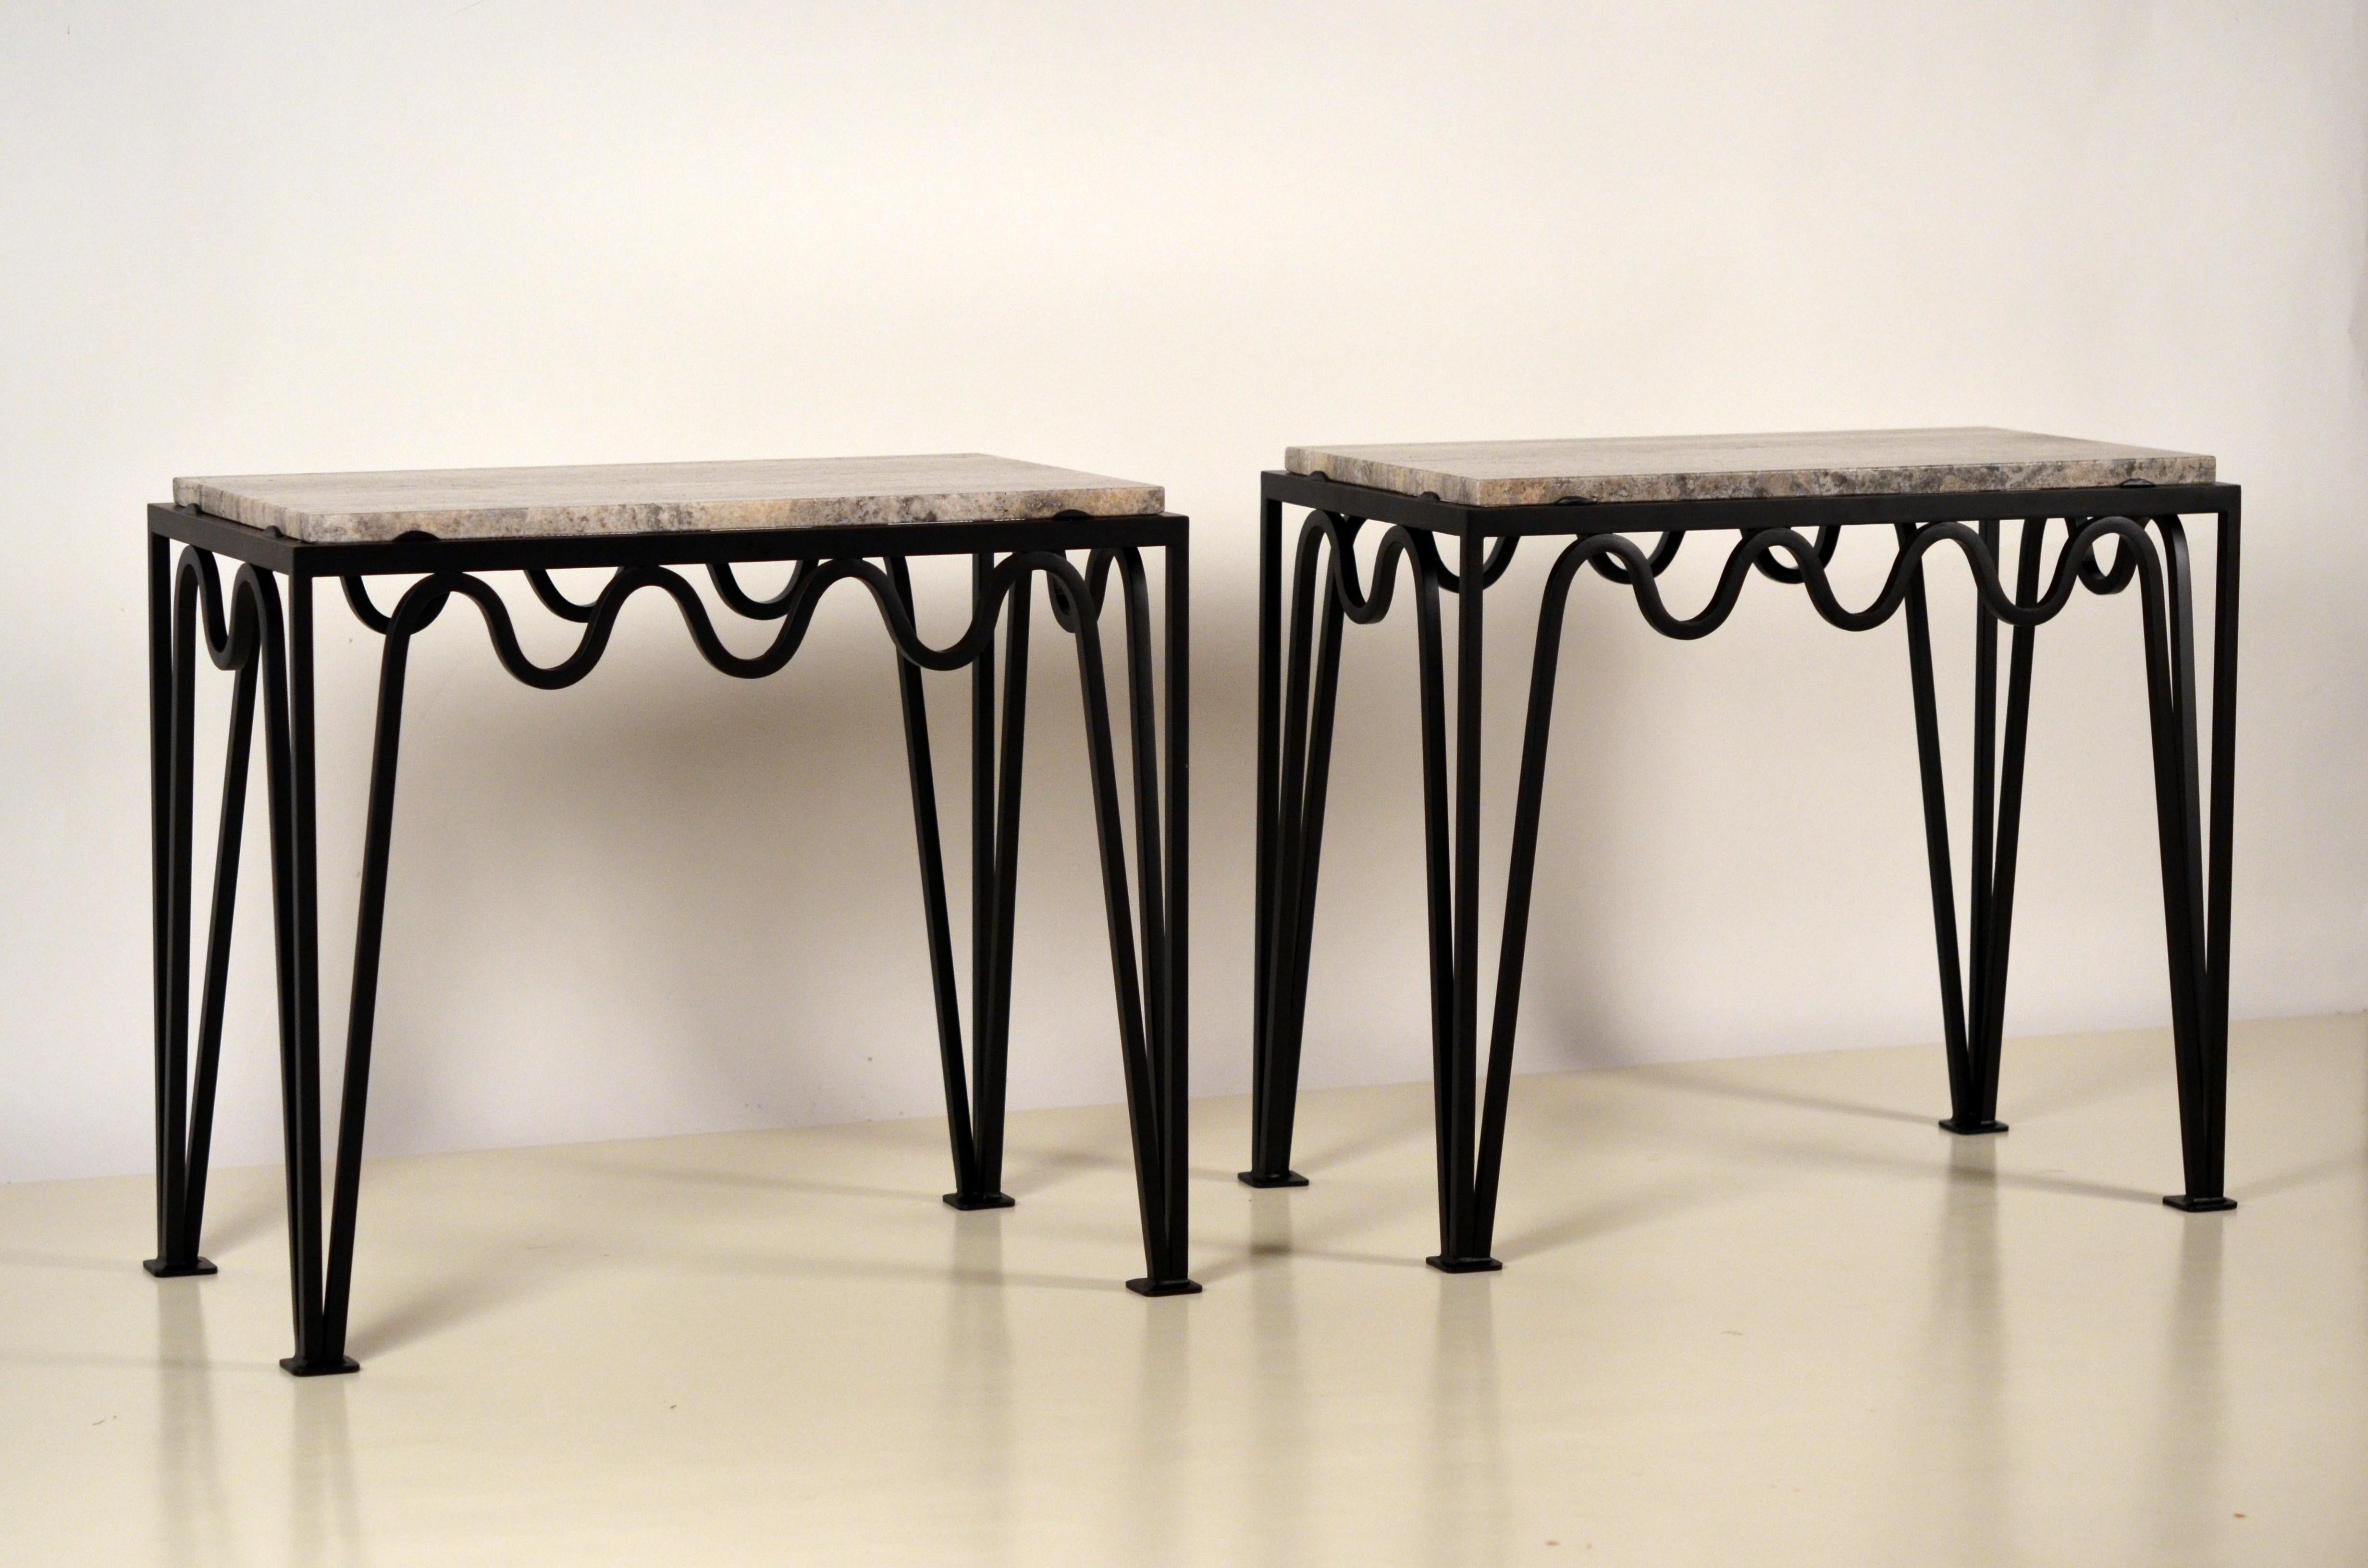 Pair of 'Méandre' black iron and silver travertine side or end tables by Design Frères.

Chic and understated.